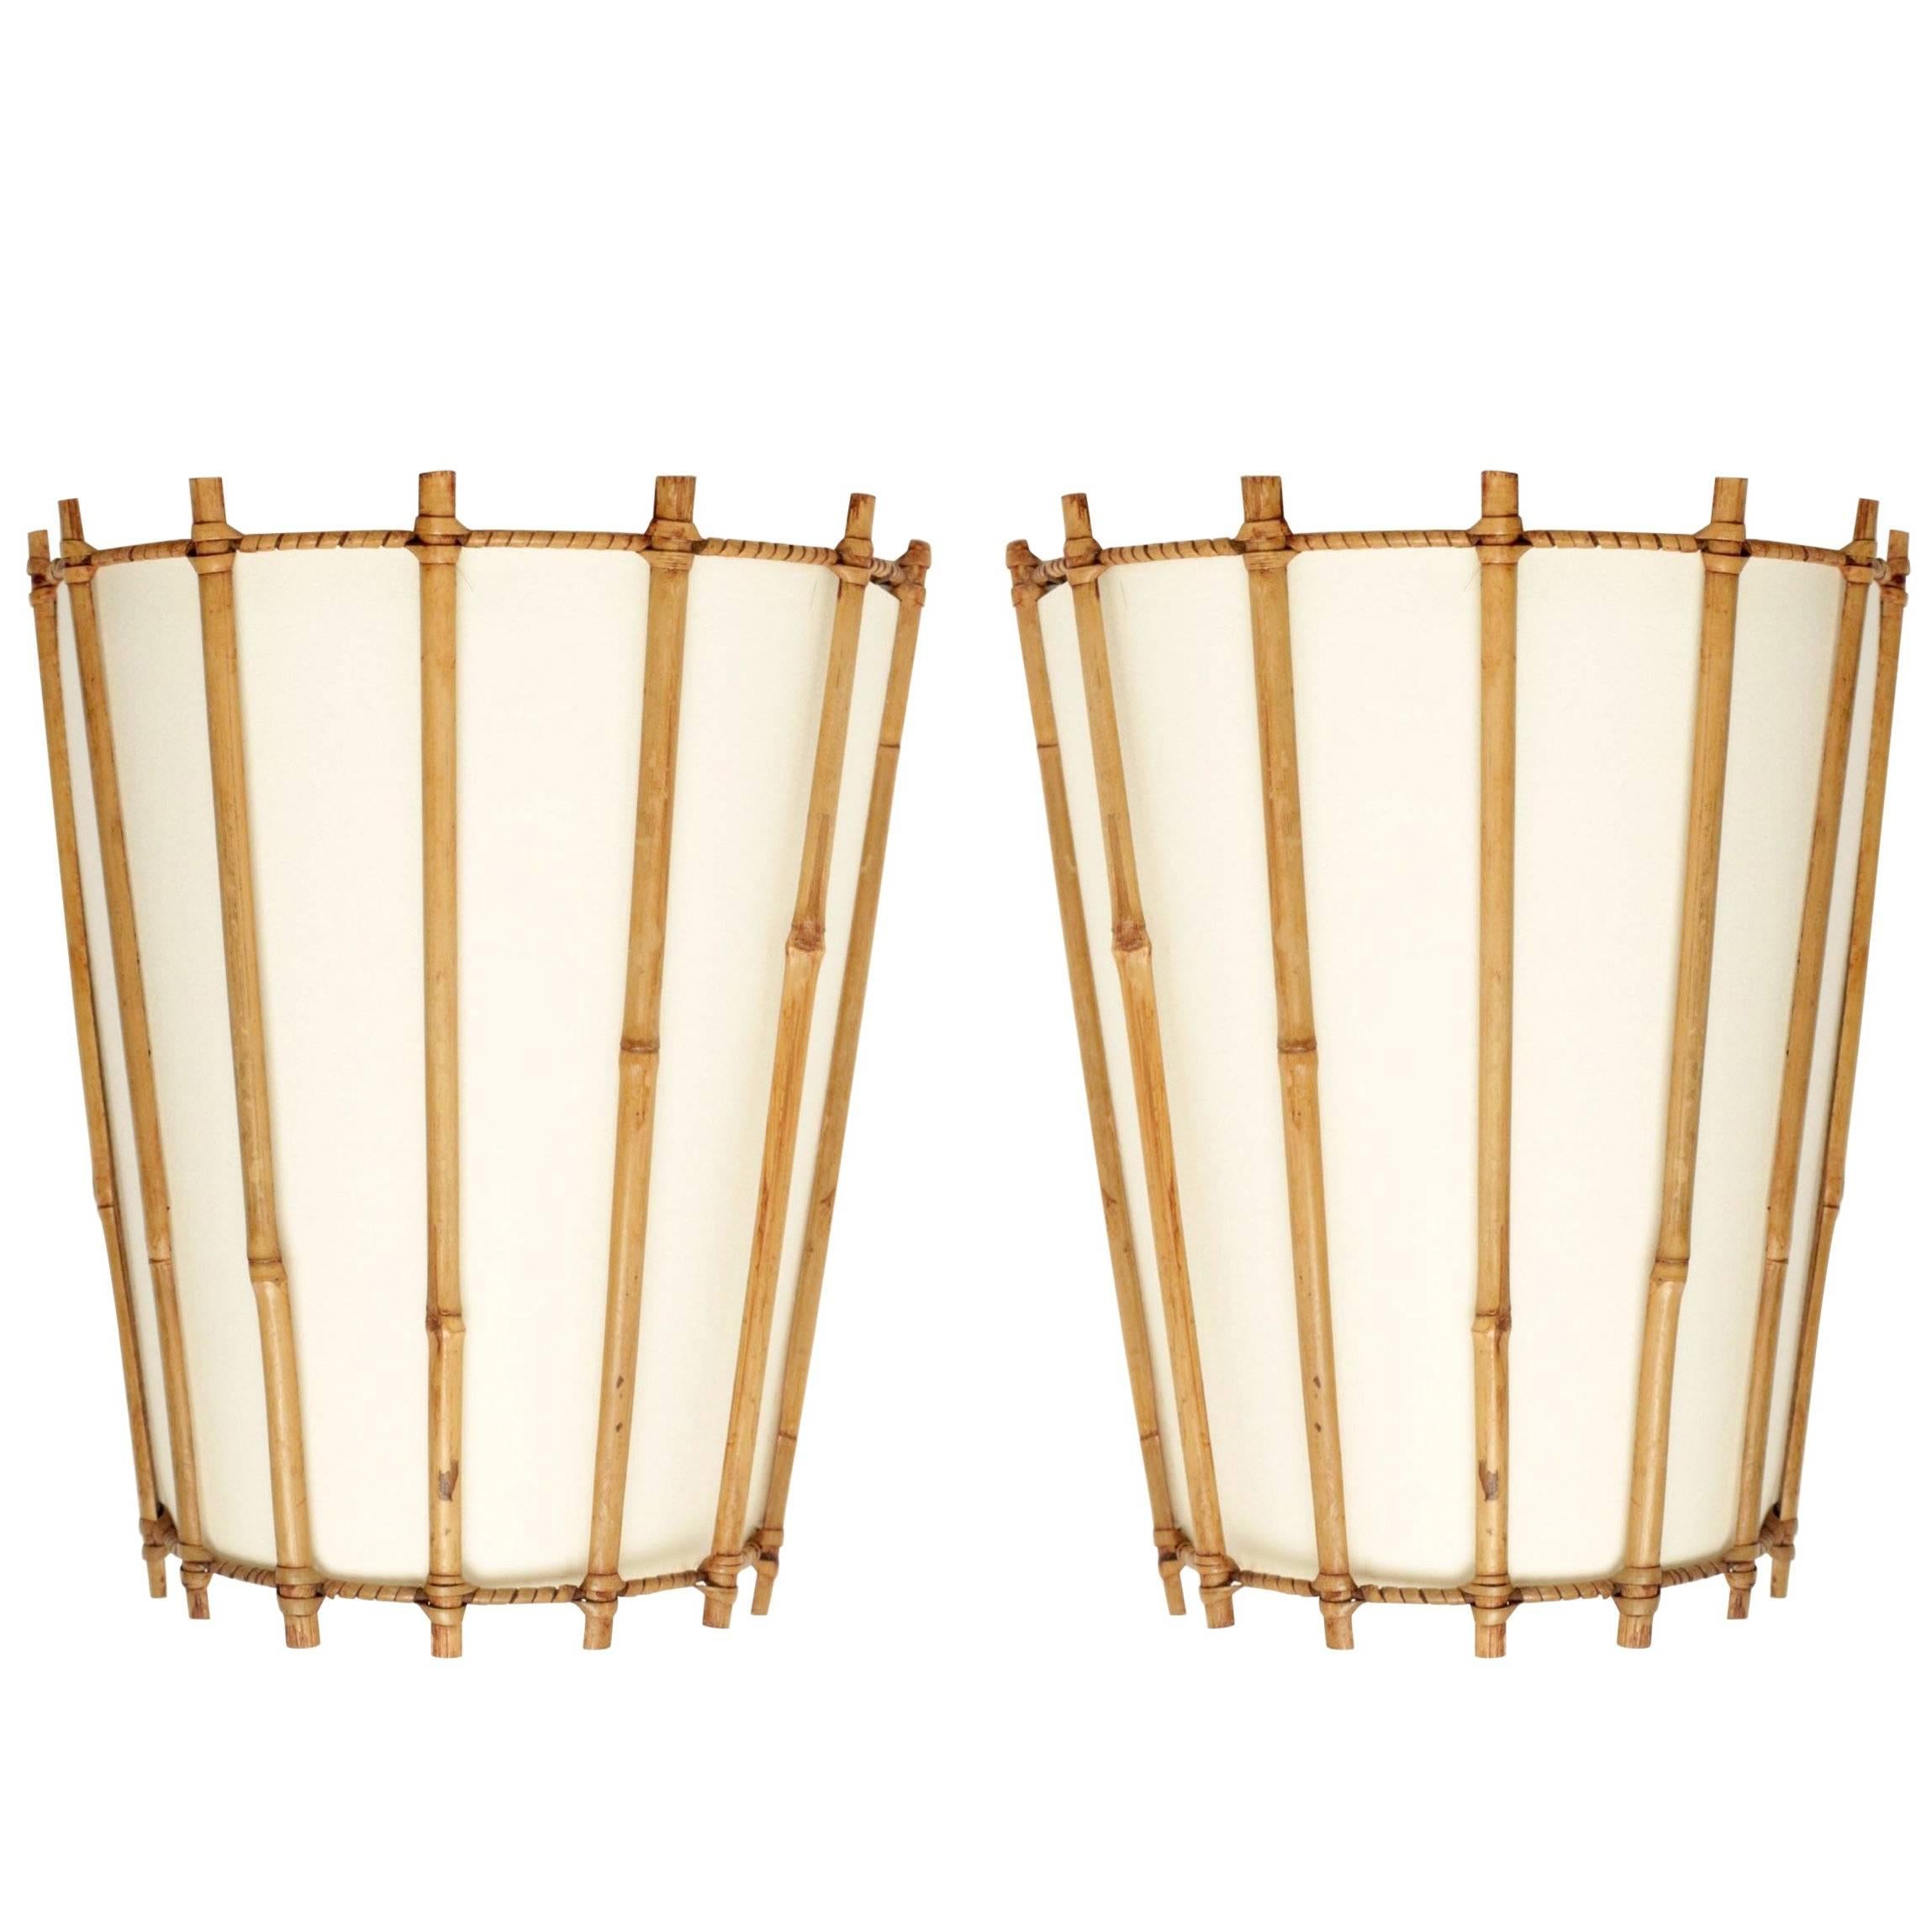 Pair of Louis Sognot Bamboo and Rattan Sconces, 1950